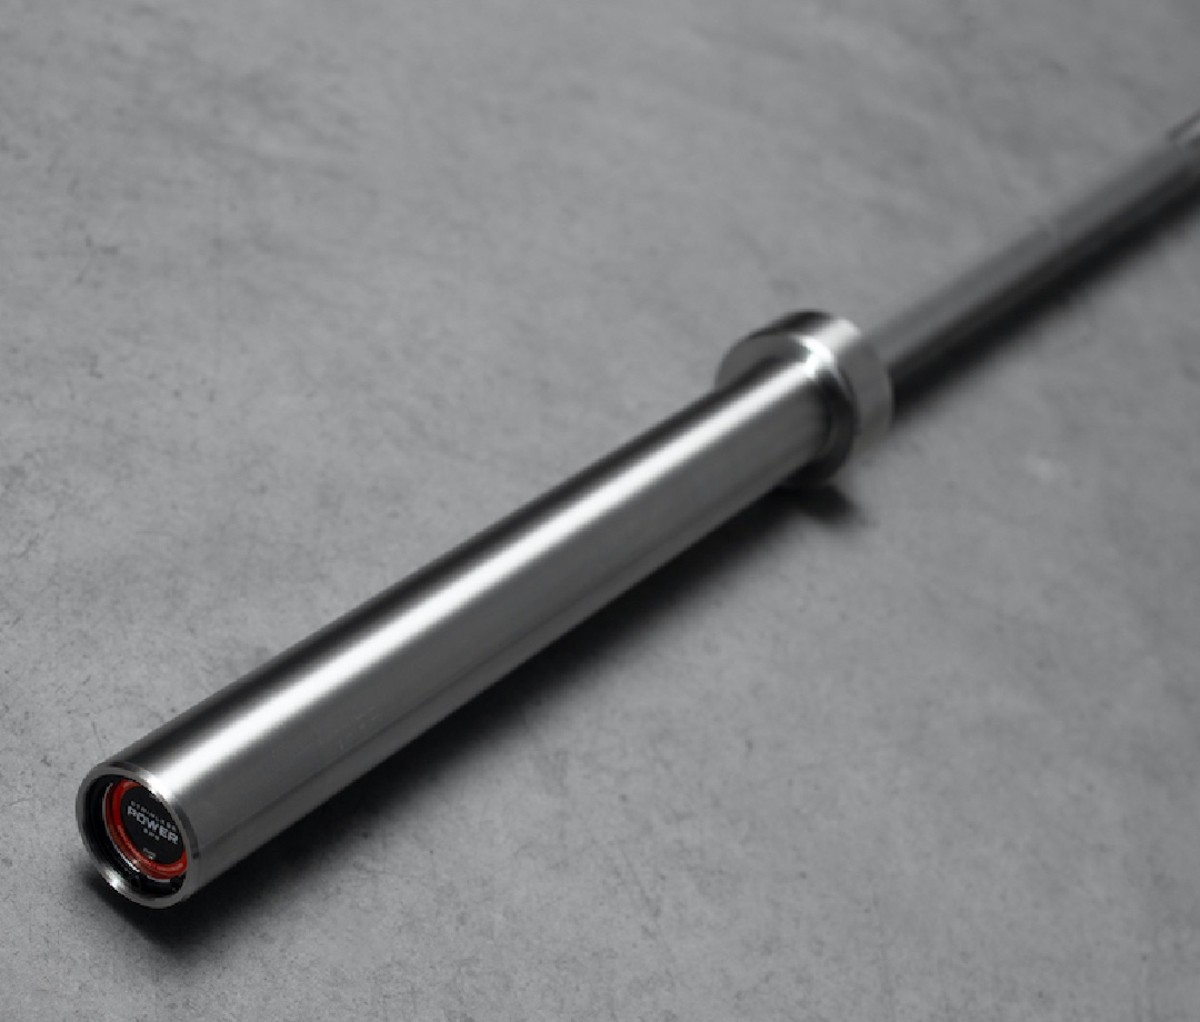 The Griffin barbell is great choice for building up your home gym.